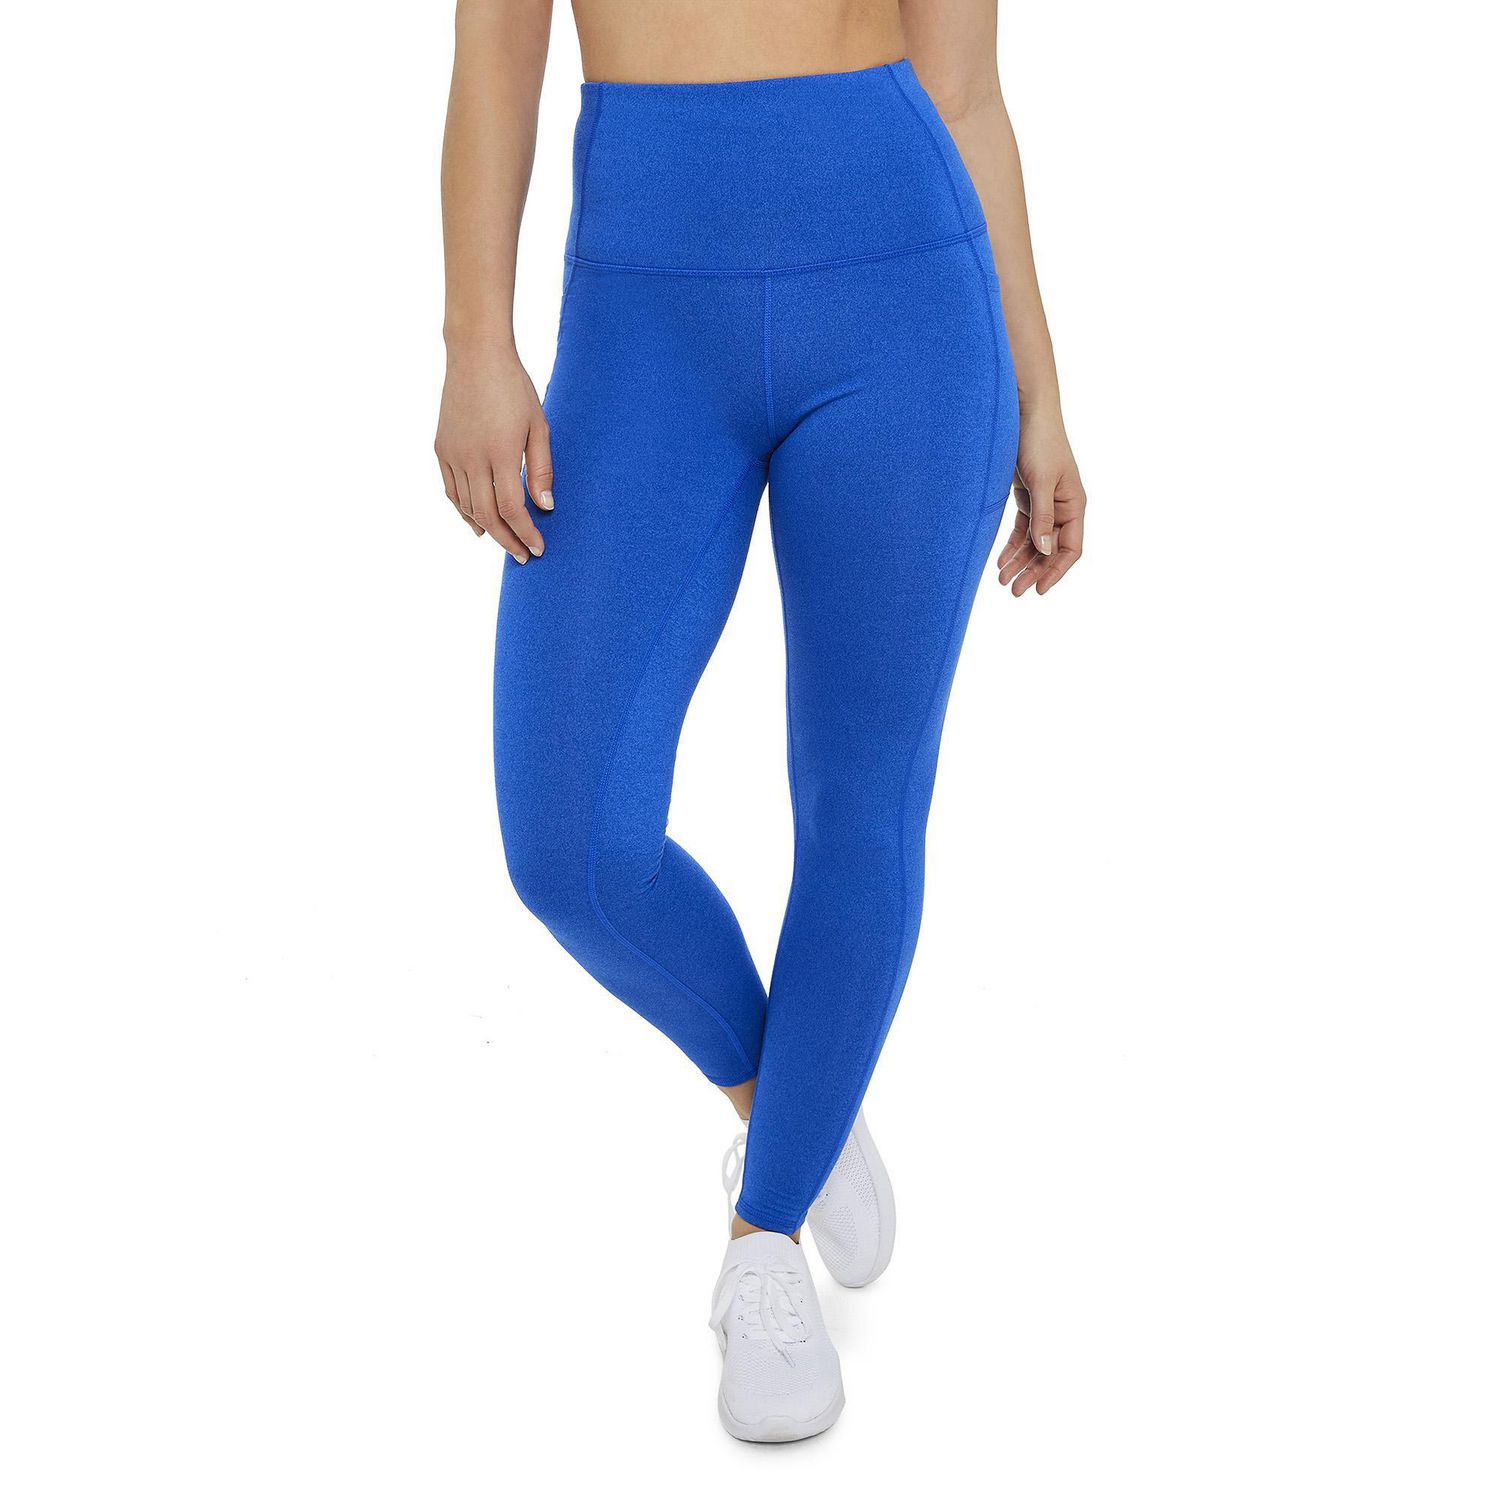 The Best Places To Buy Leggings